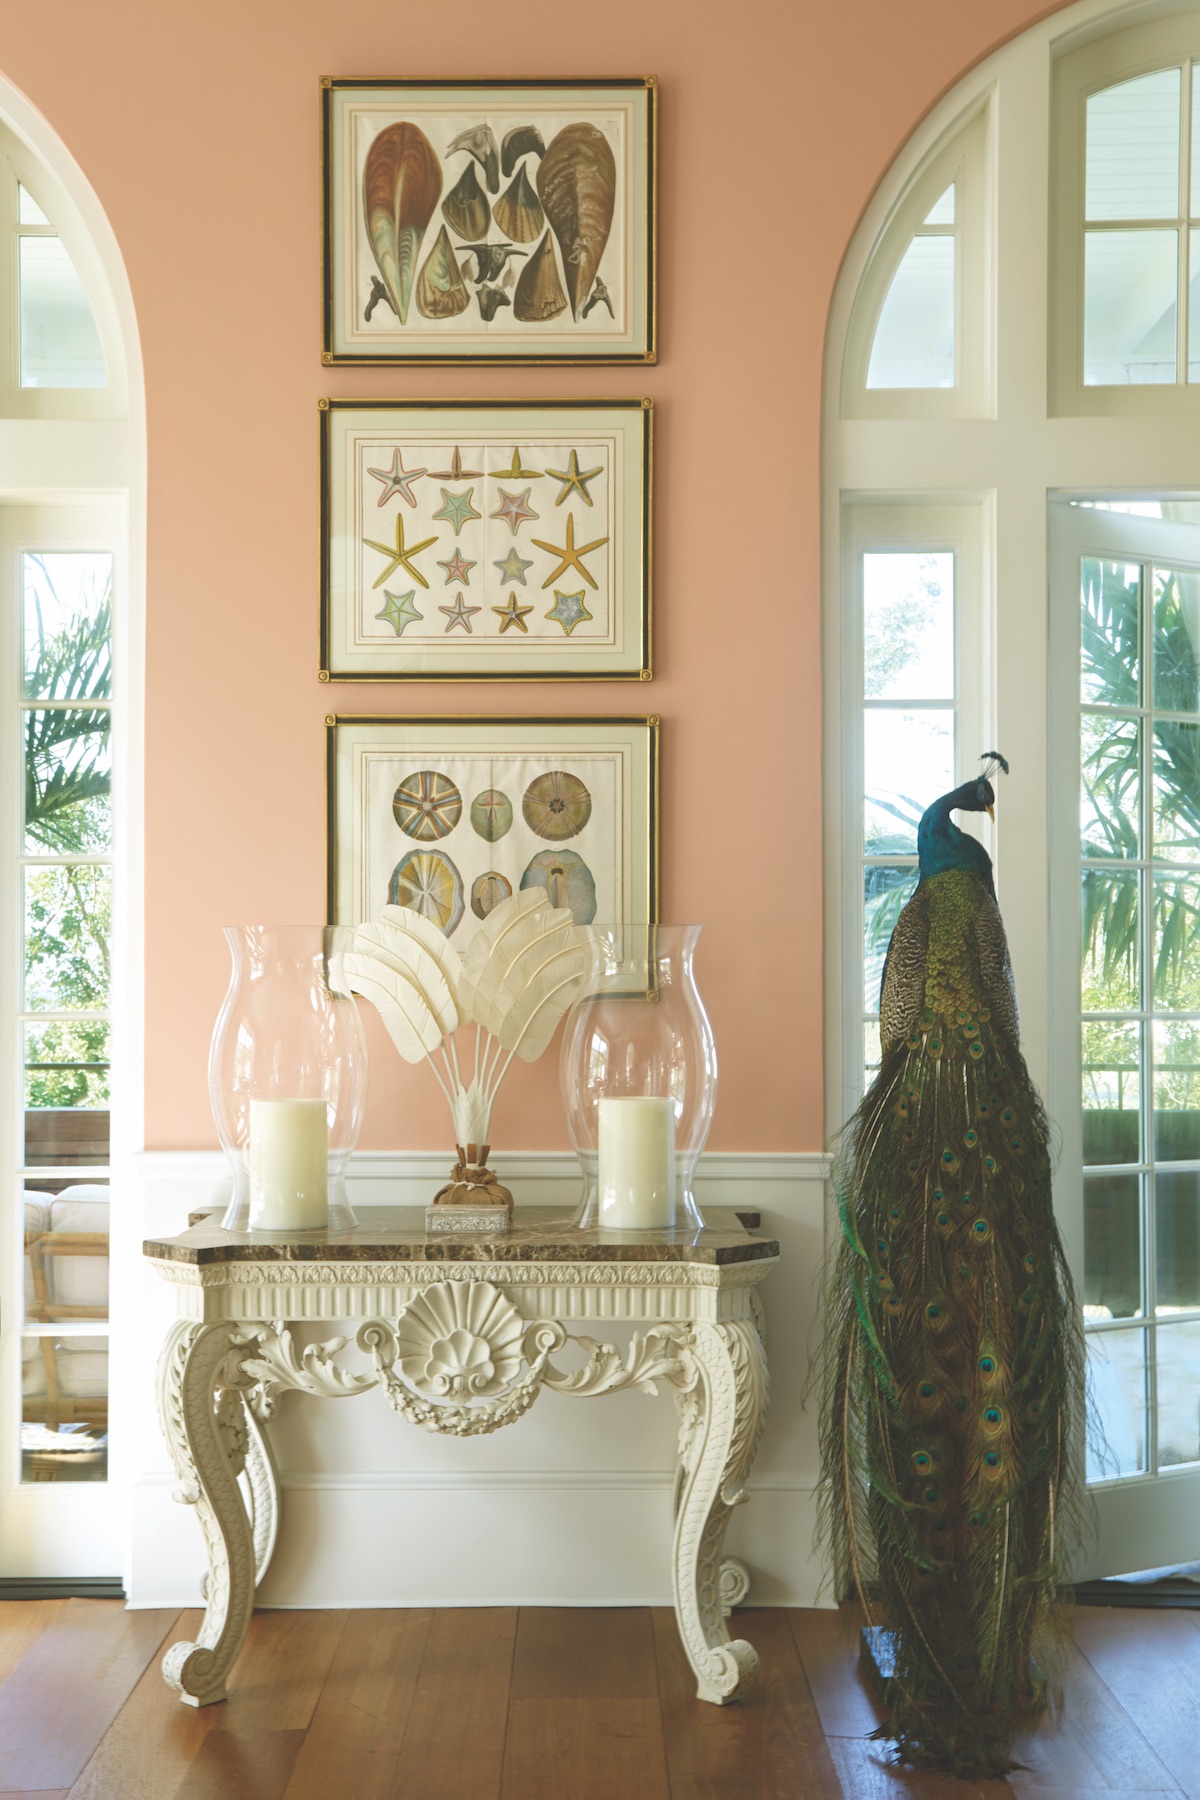 A suite of shell watercolors hangs above a Kentian carved console. The stuffed peacock adds playfulness to the space.